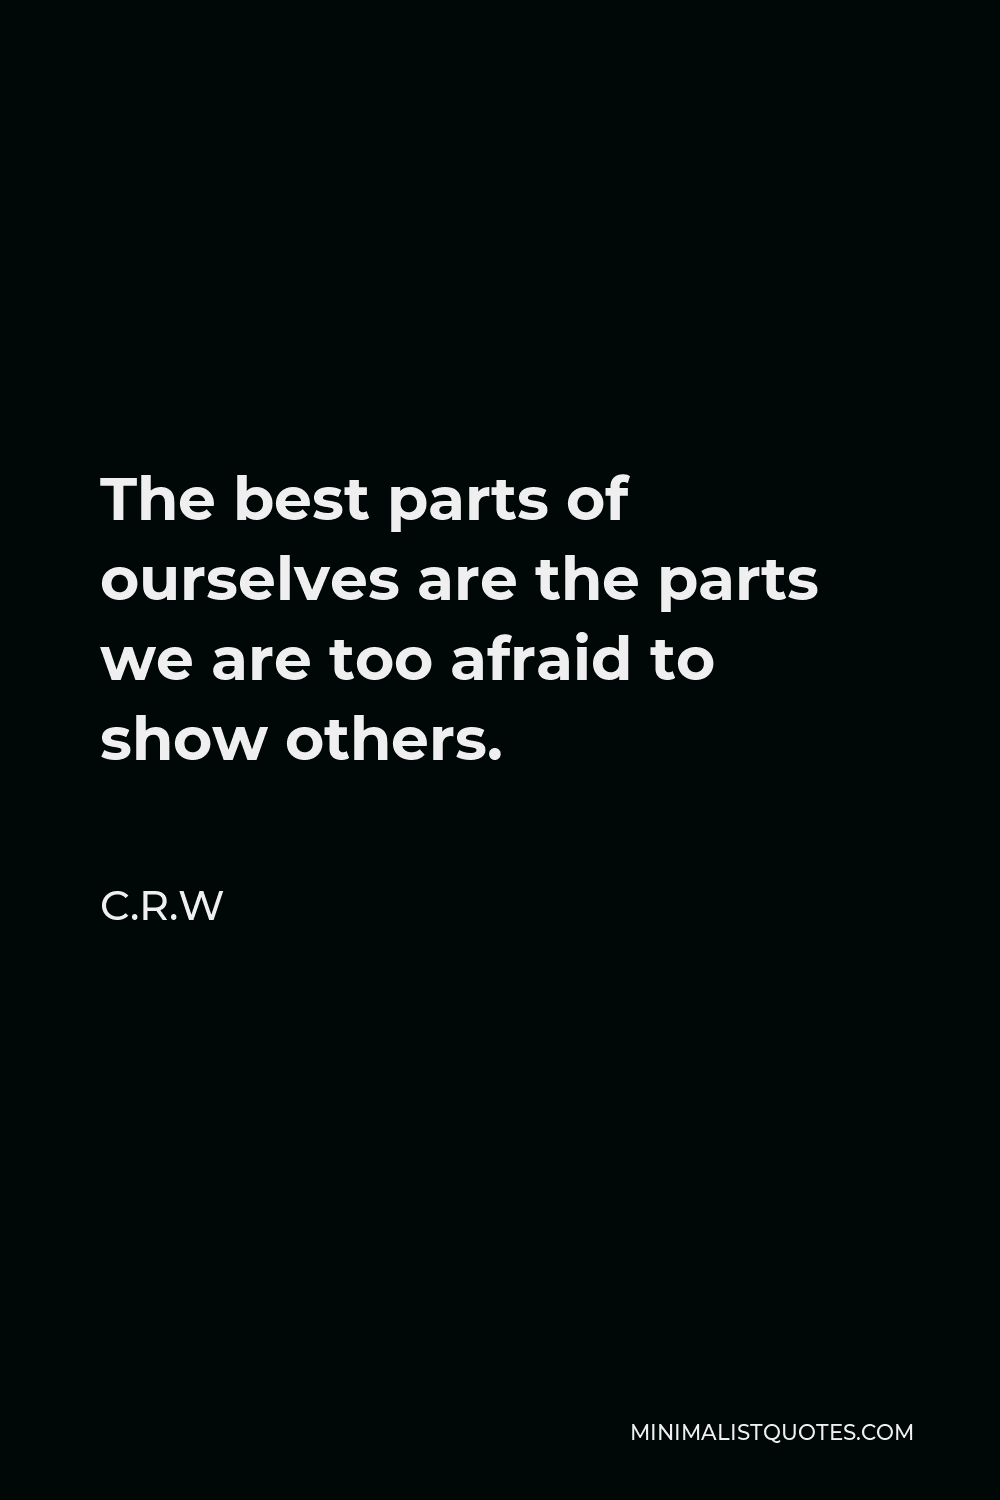 C.R.W Quote - The best parts of ourselves are the parts we are too afraid to show others.